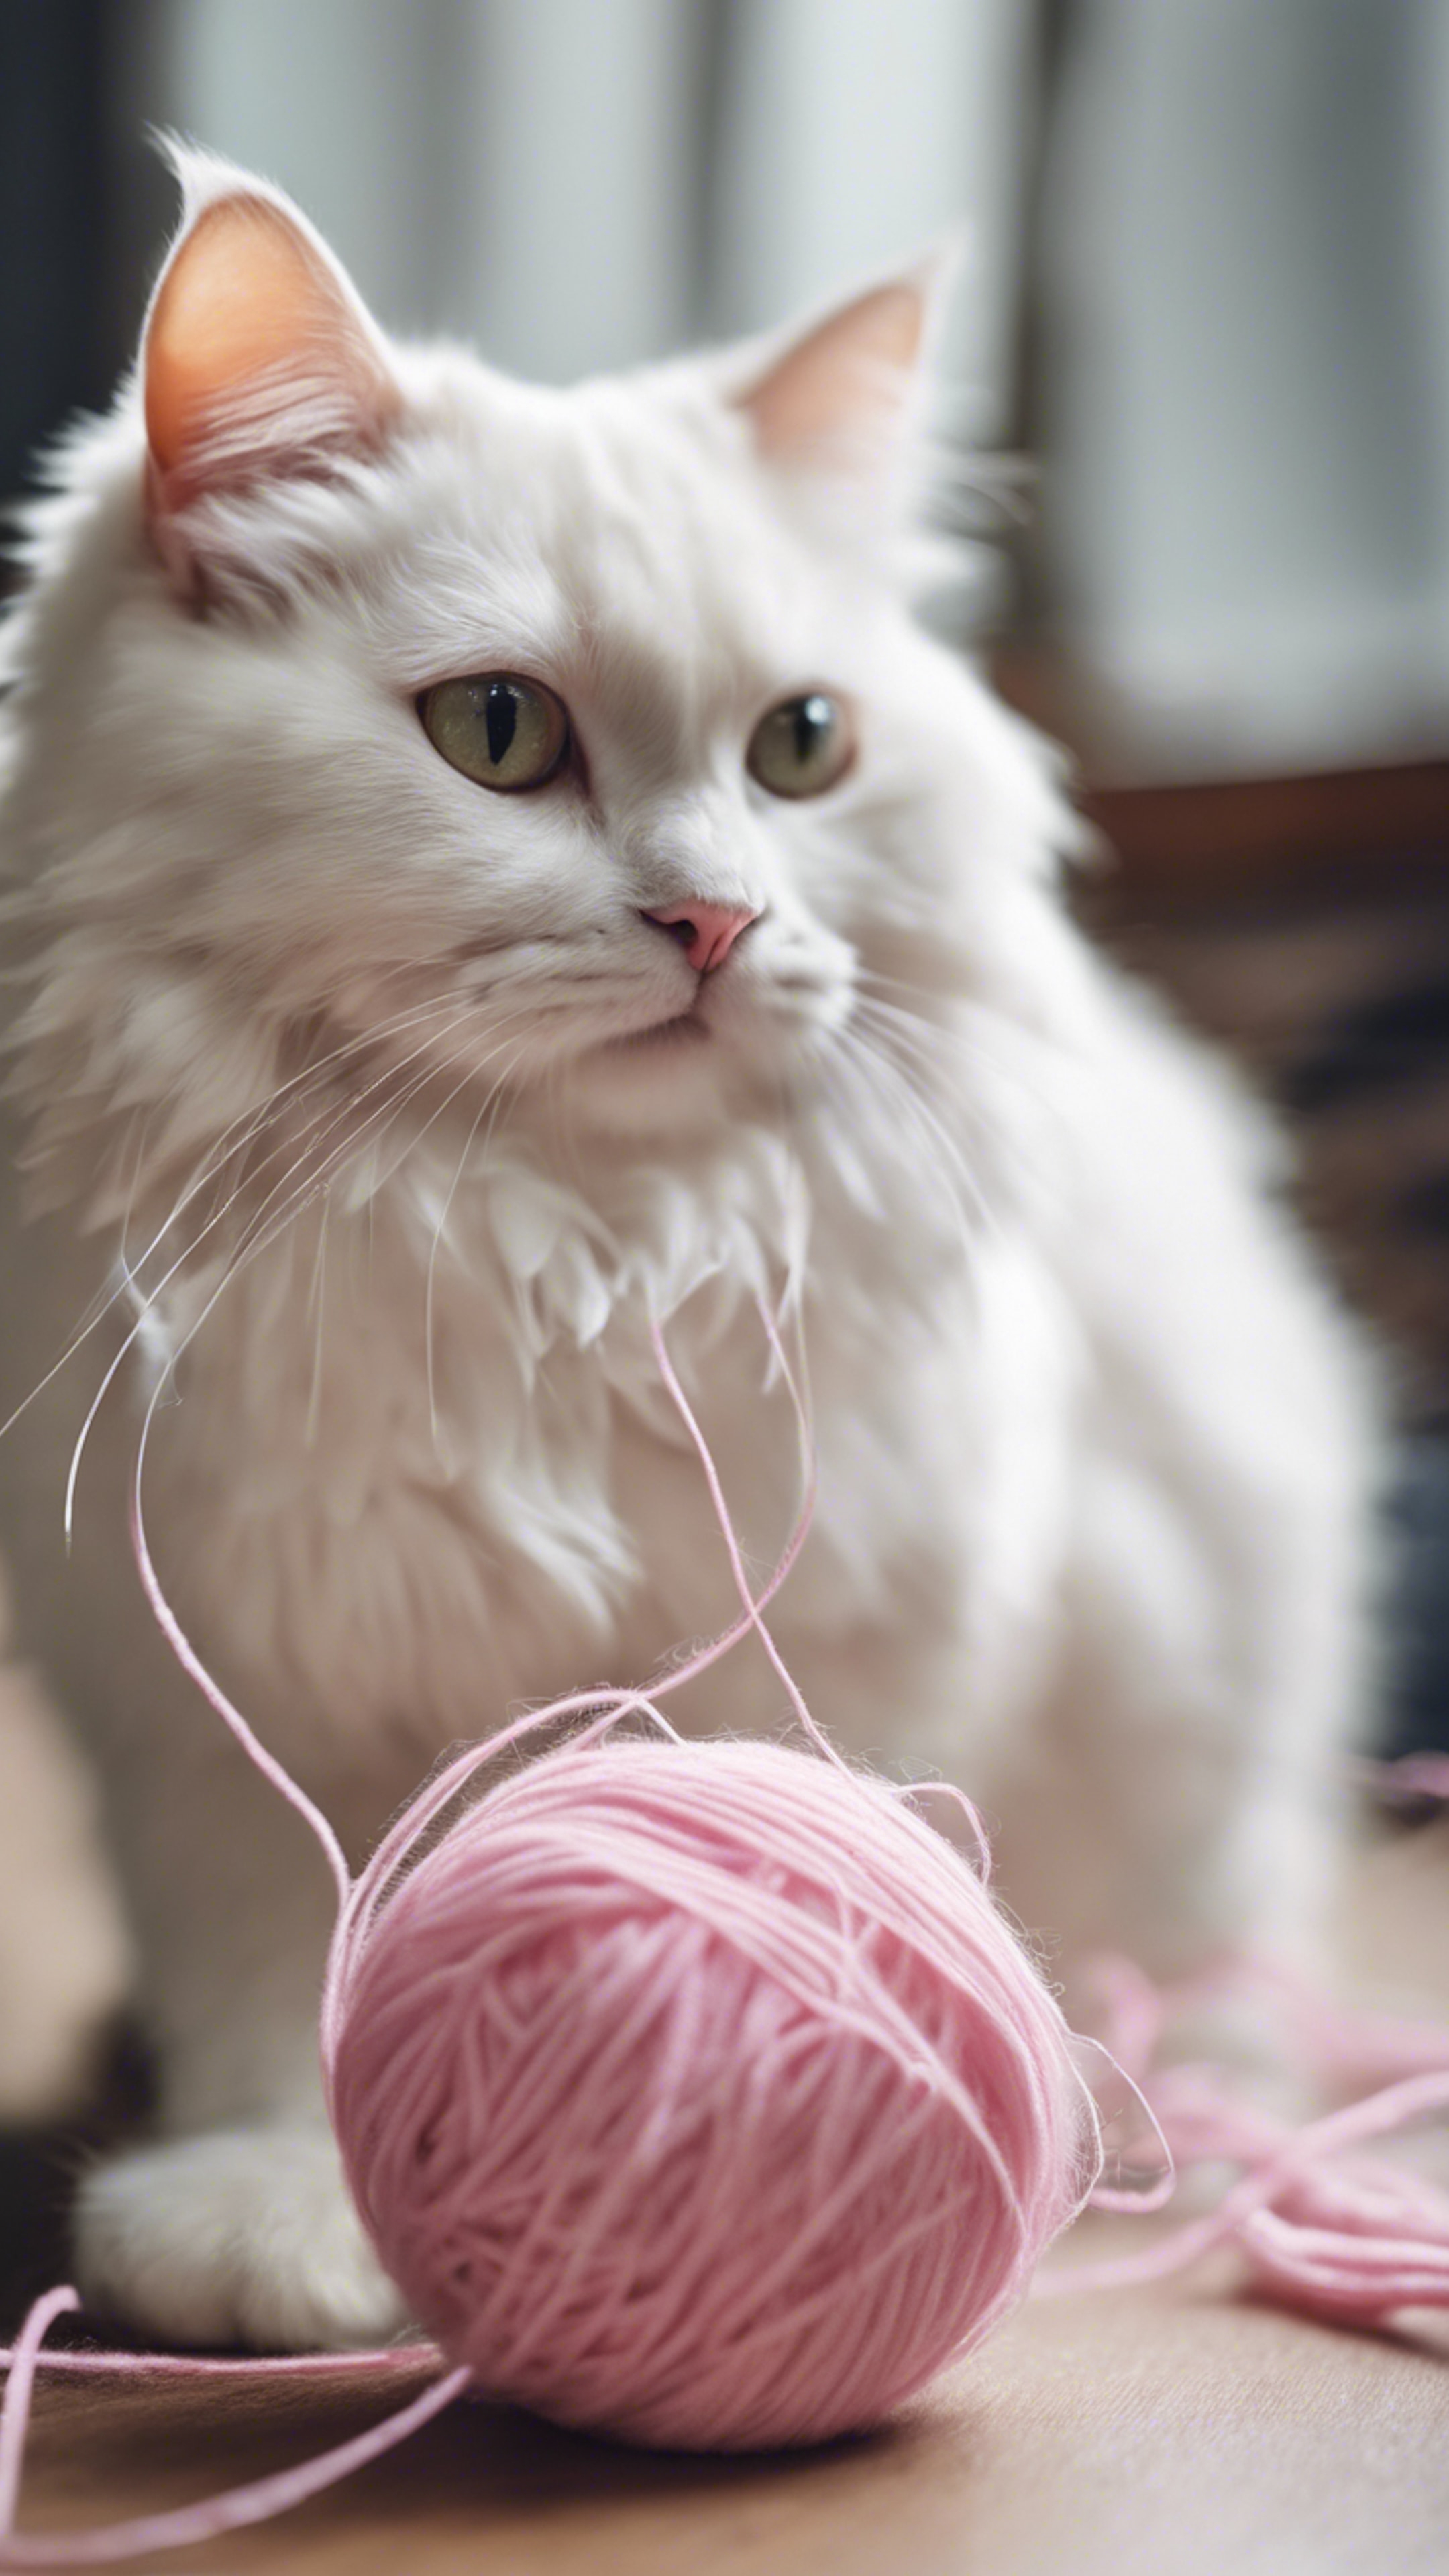 An adorable white cat, fluff all around, playing with a pink ball of yarn. Wallpaper[2f9056787526421e963d]